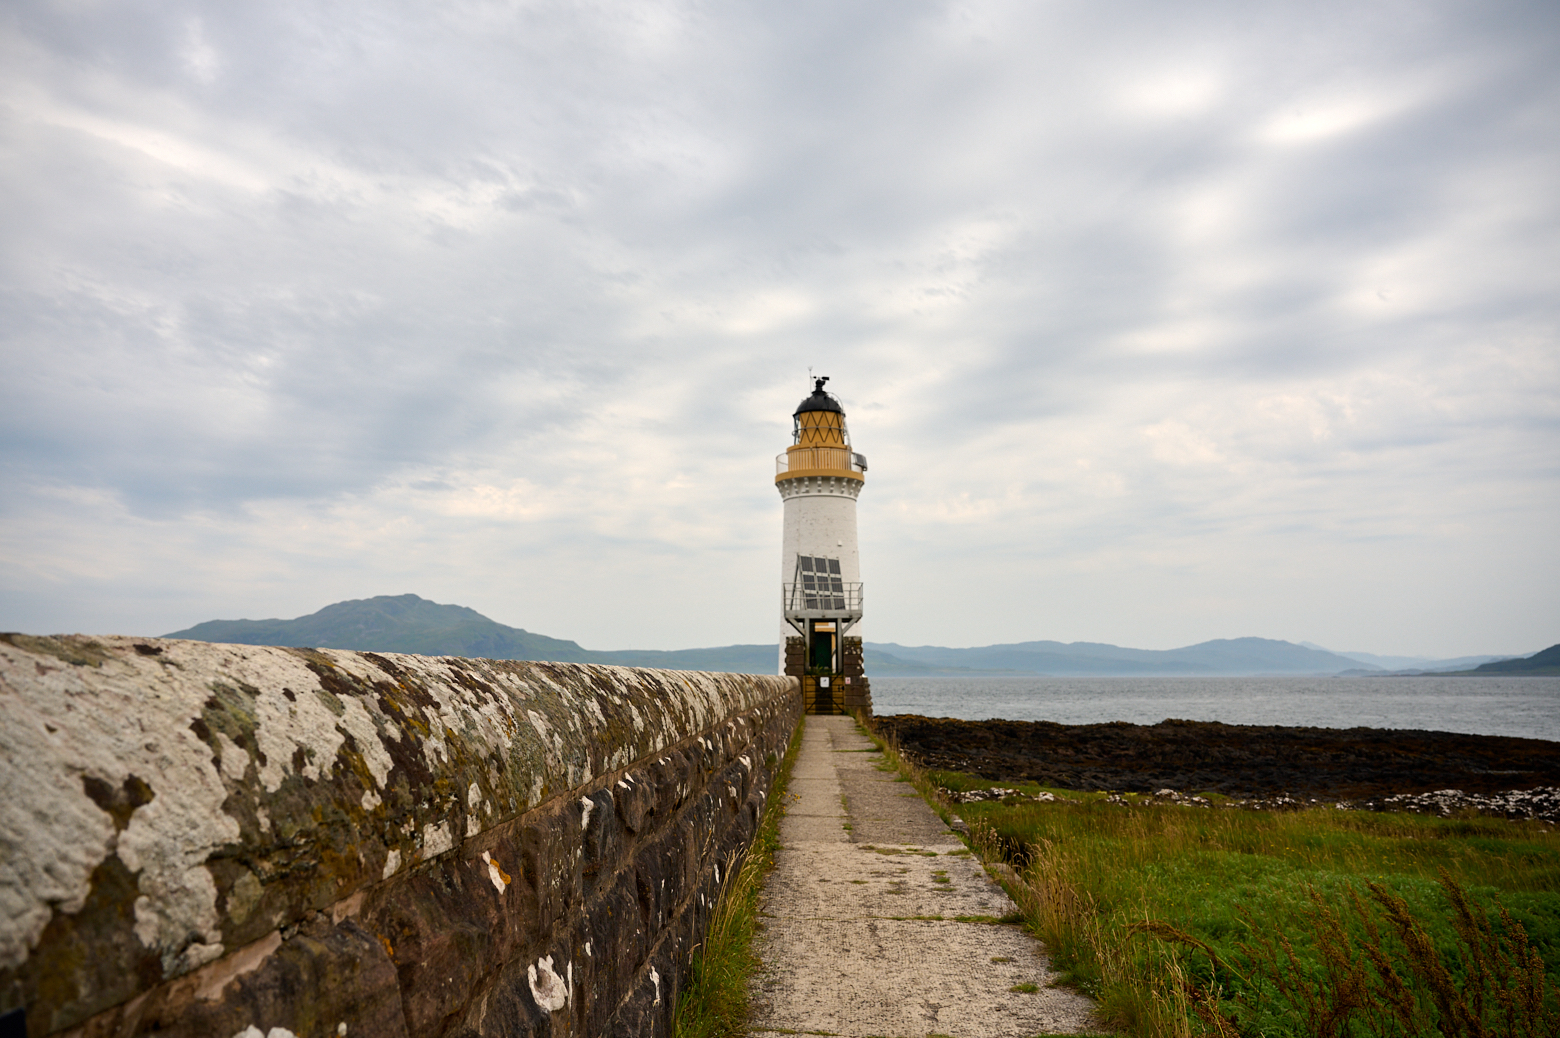 Walking from Tobermory to the Tobermory Lighthouse in the Isle of Mull.